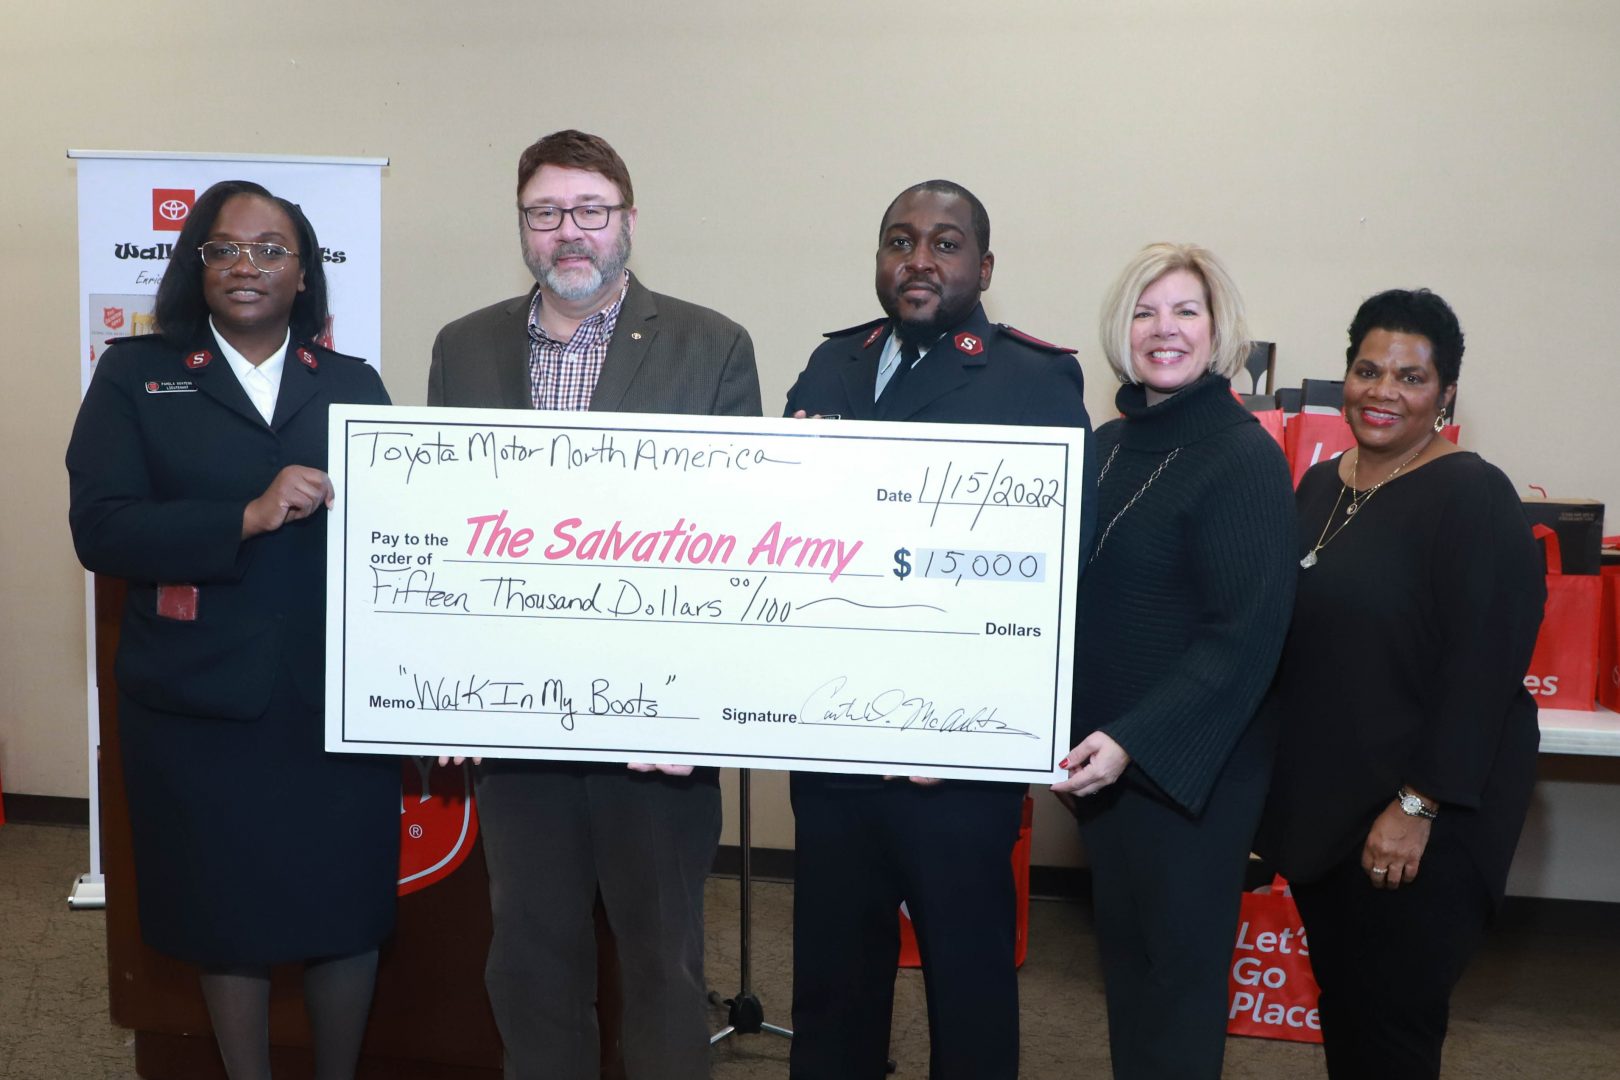 Toyota supports Detroit by donating winter boots to low-income families and providing funds to The Salvation Army